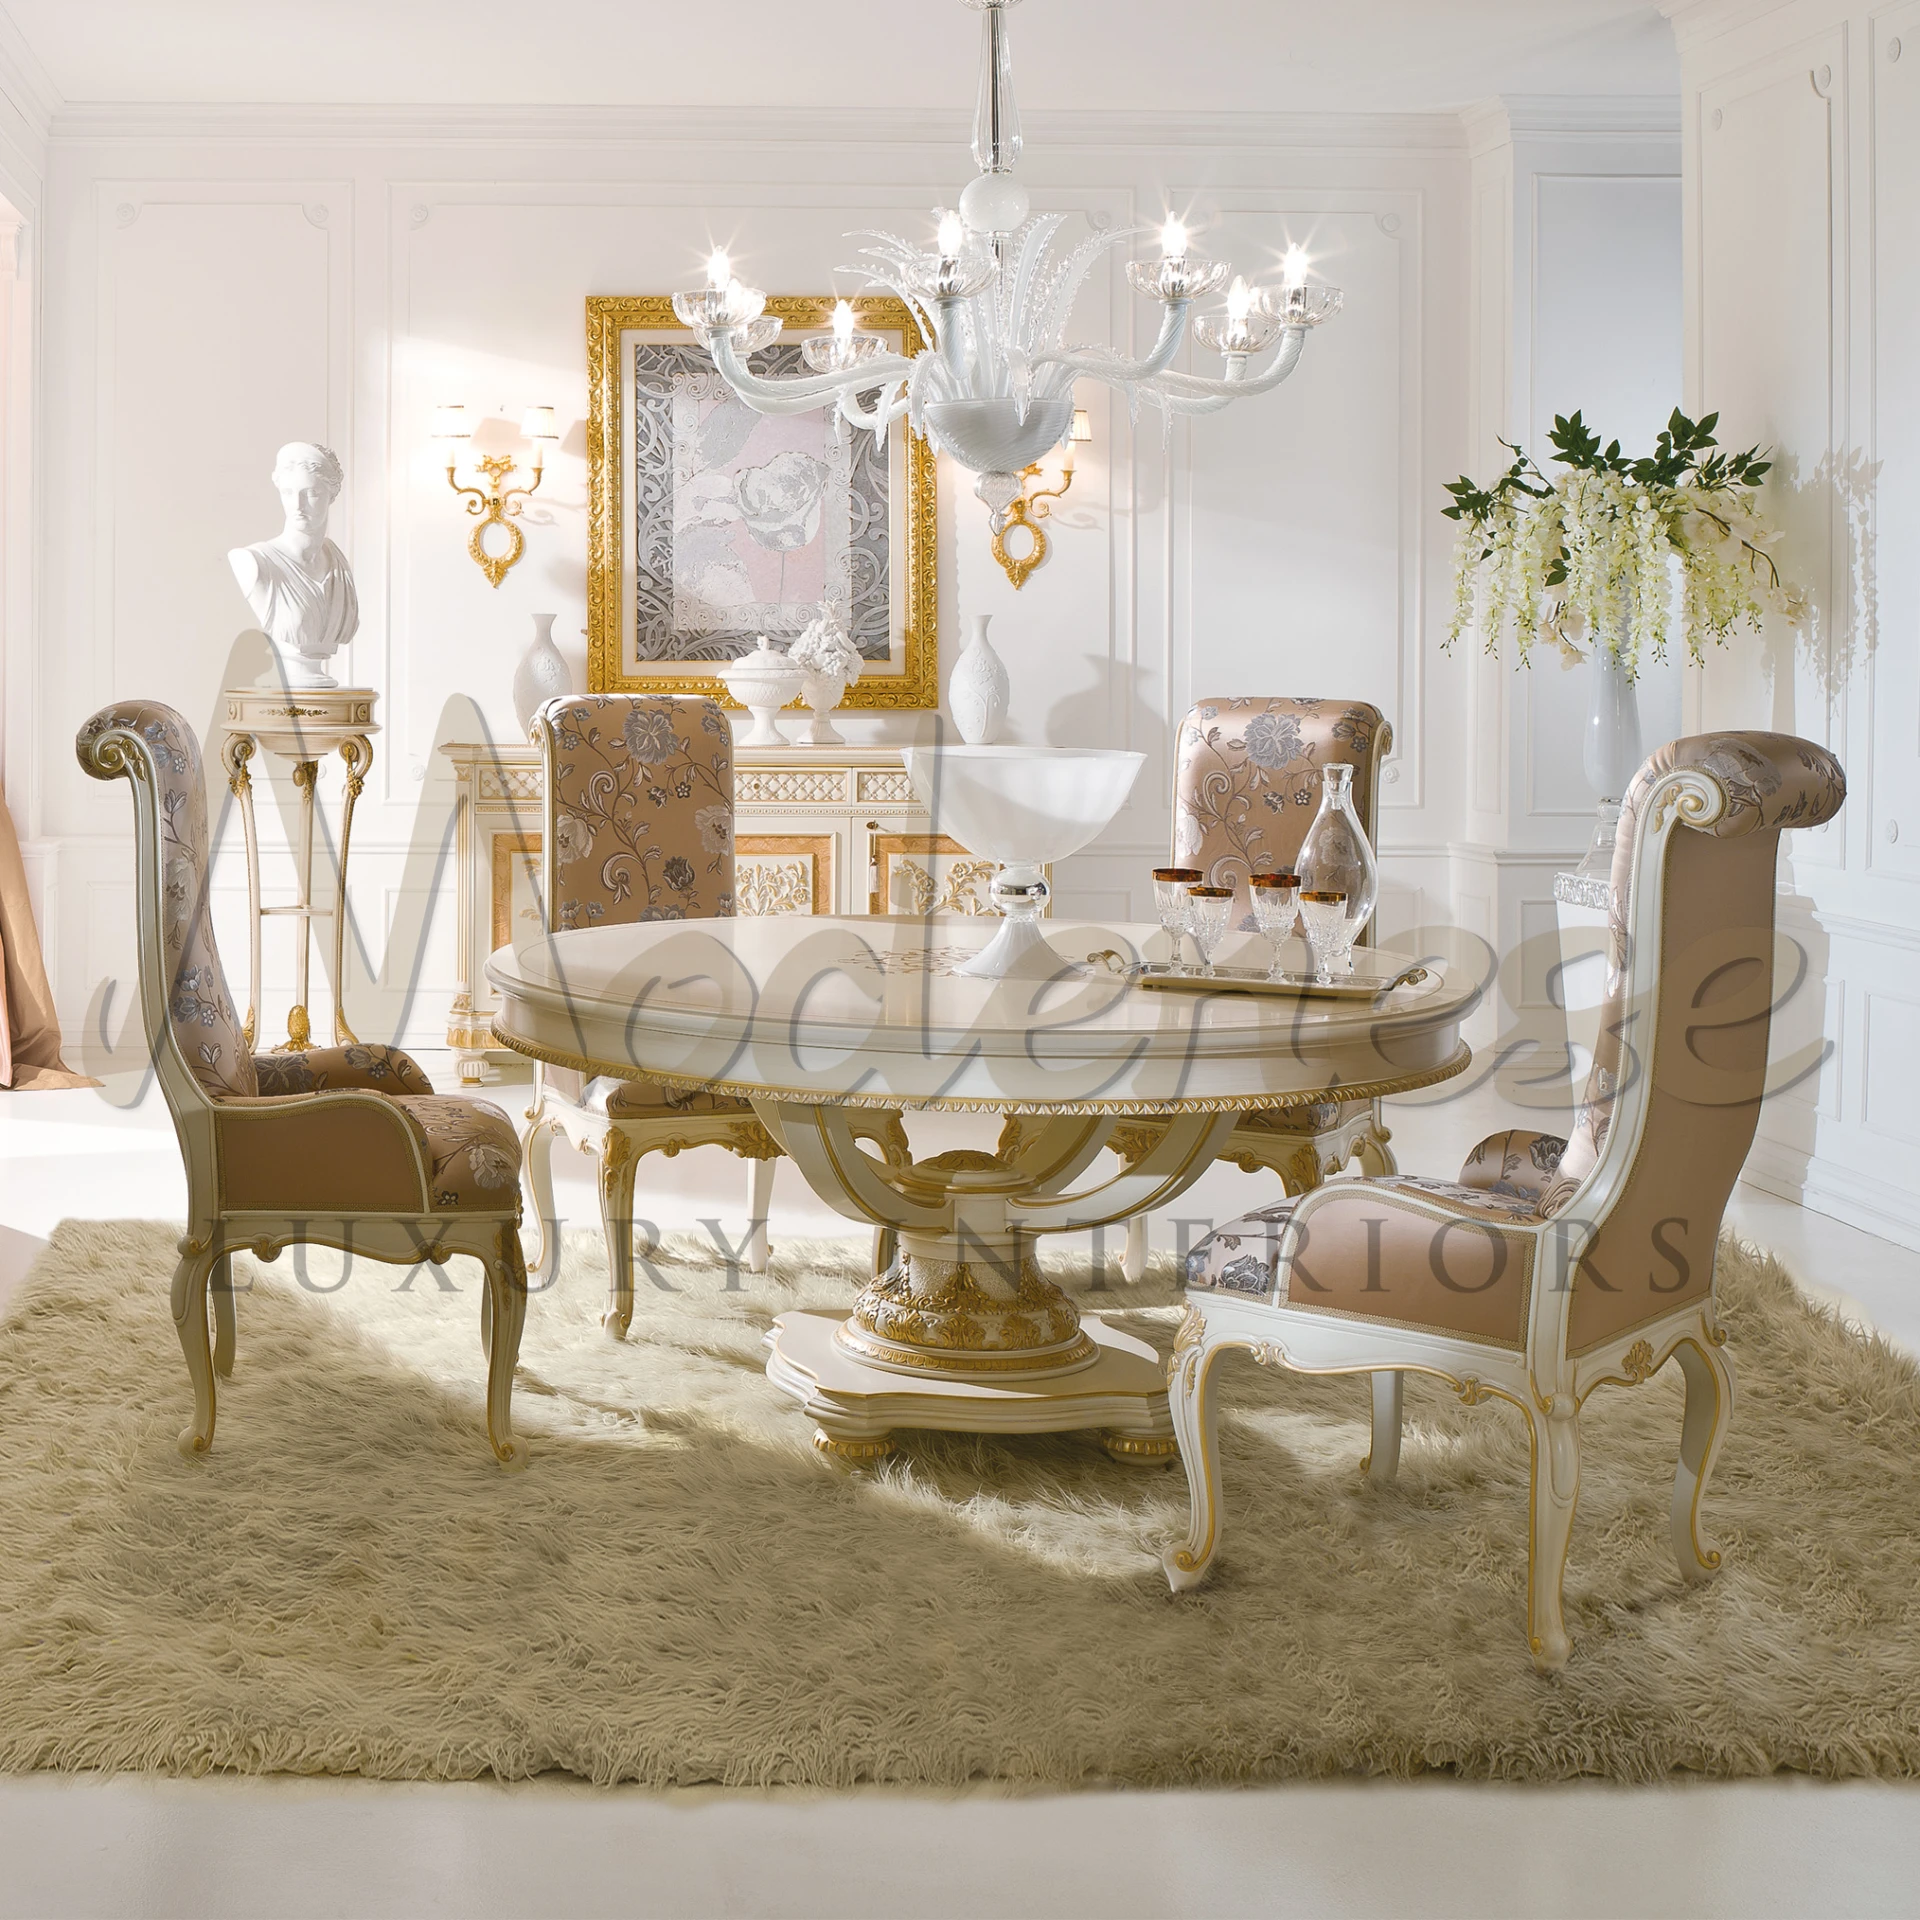 A display of luxury interior design with detailed furniture and opulent lighting.